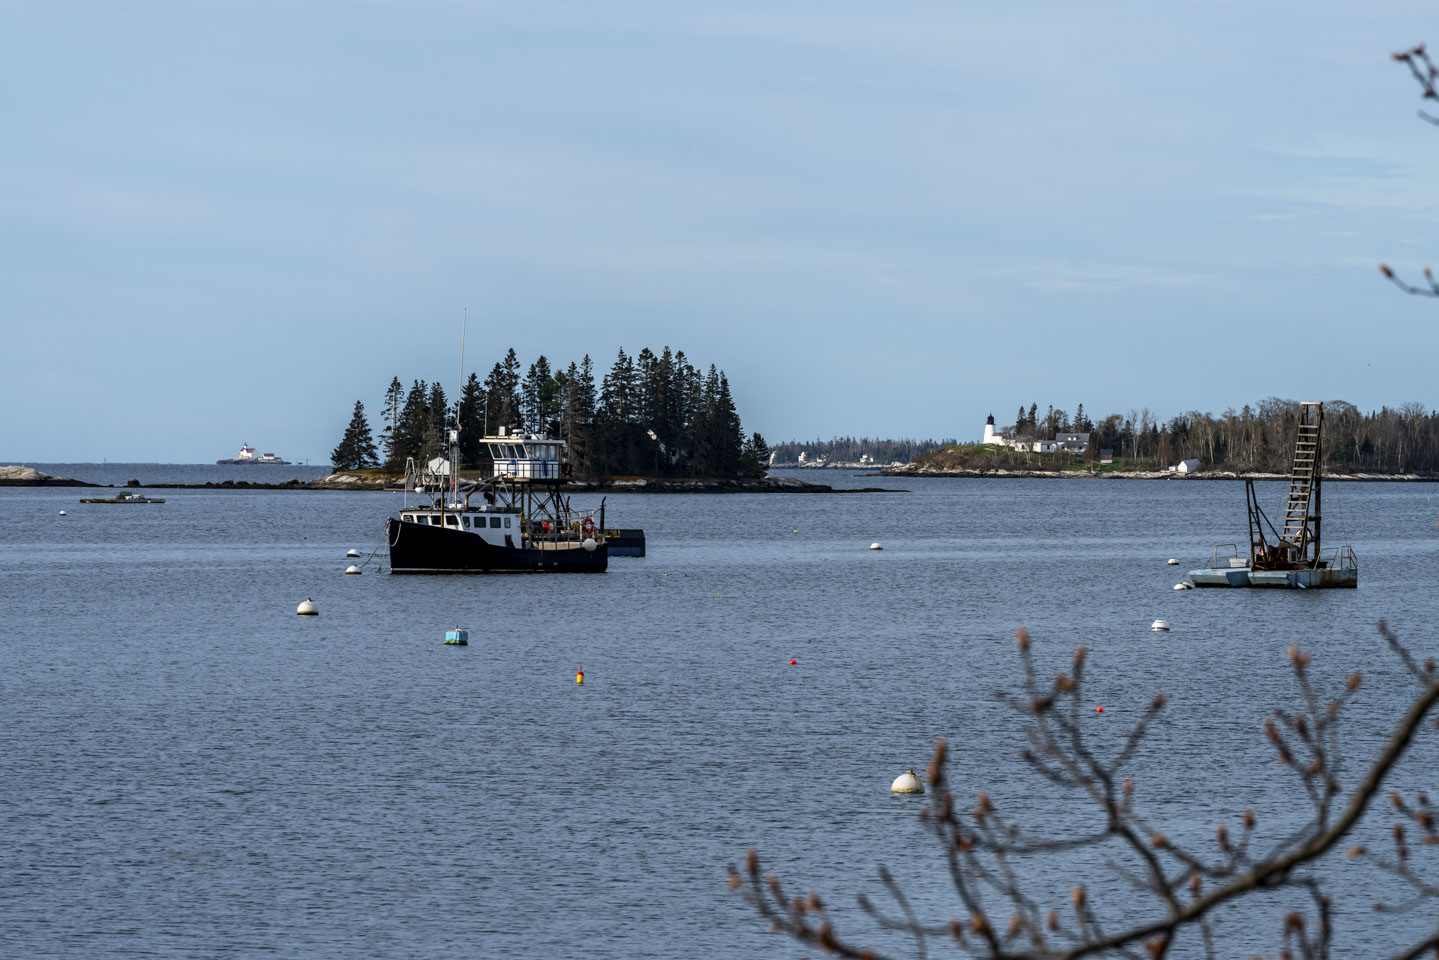 Burnt Island Light and Cuckolds viewed from Tugboat Inn parking area